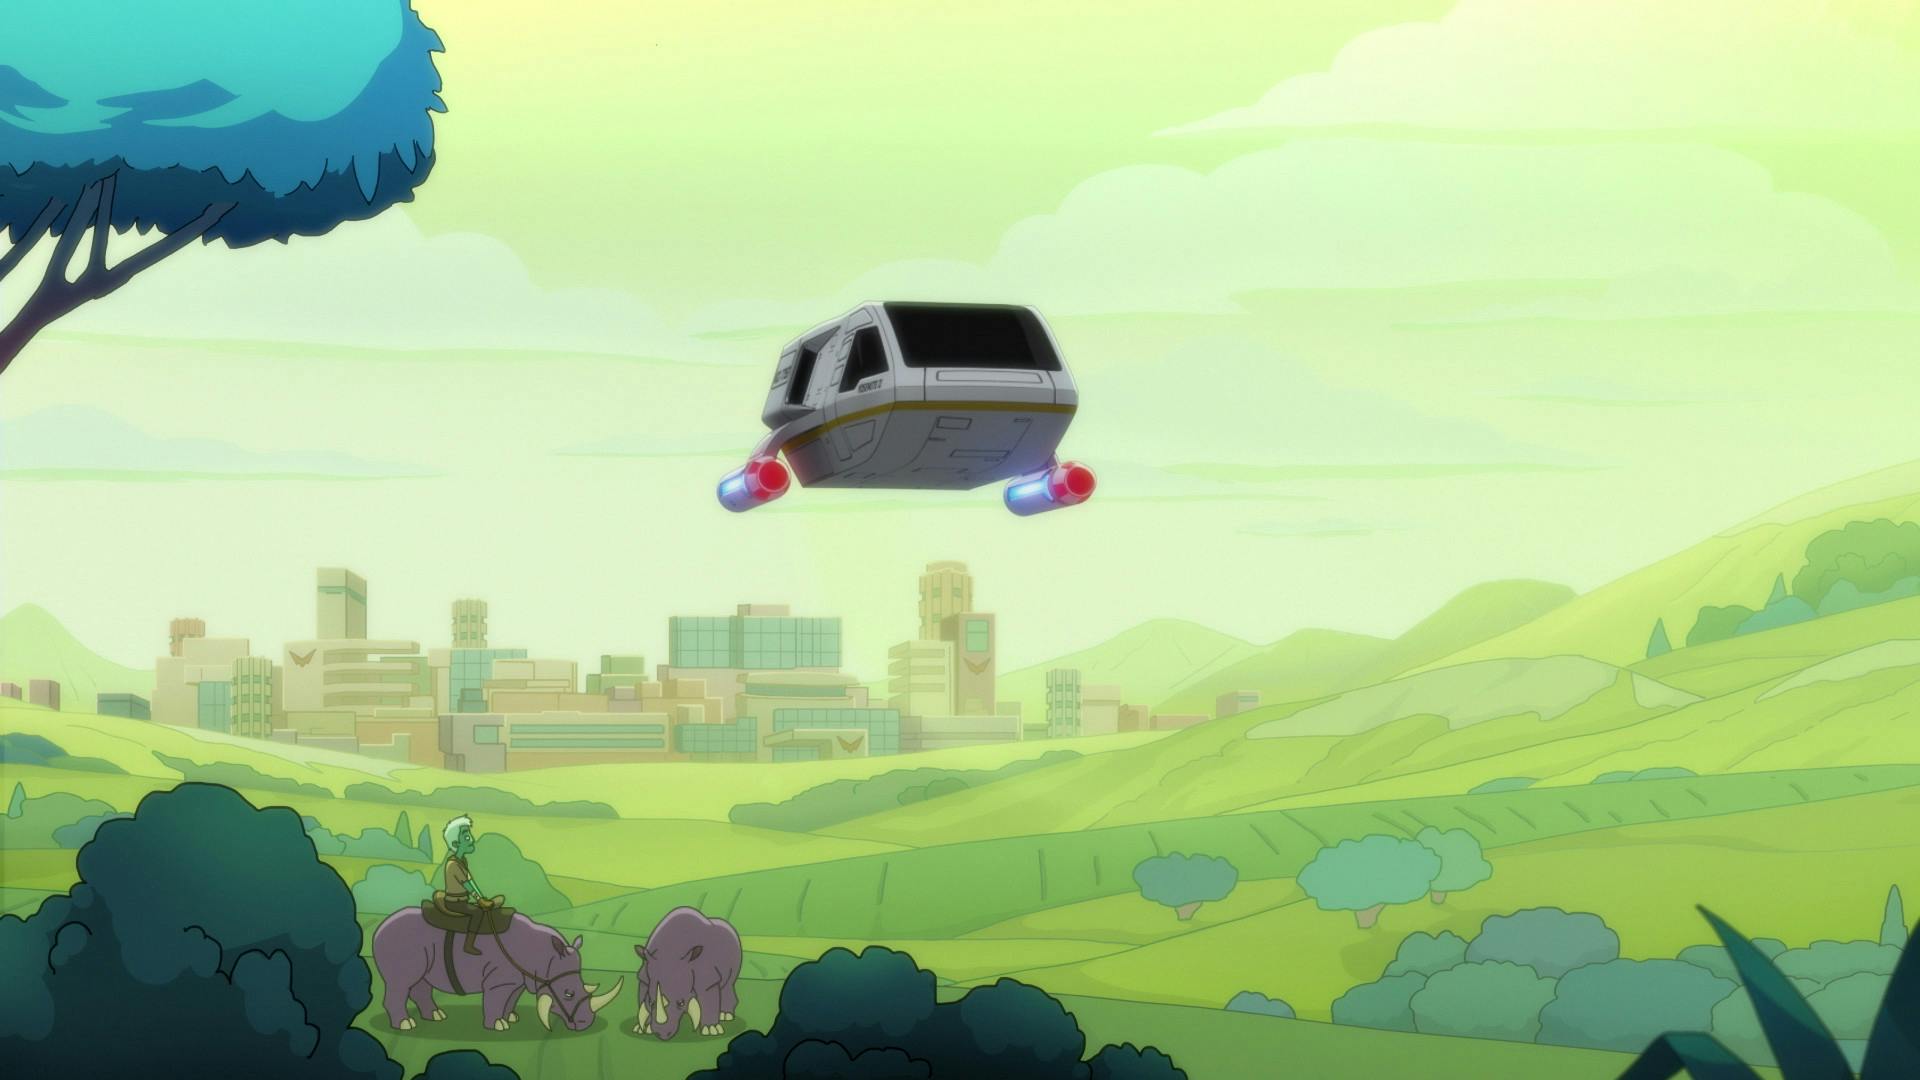 A Cerritos shuttle flies over the Orion countryside in 'Something Borrowed, Something Green'